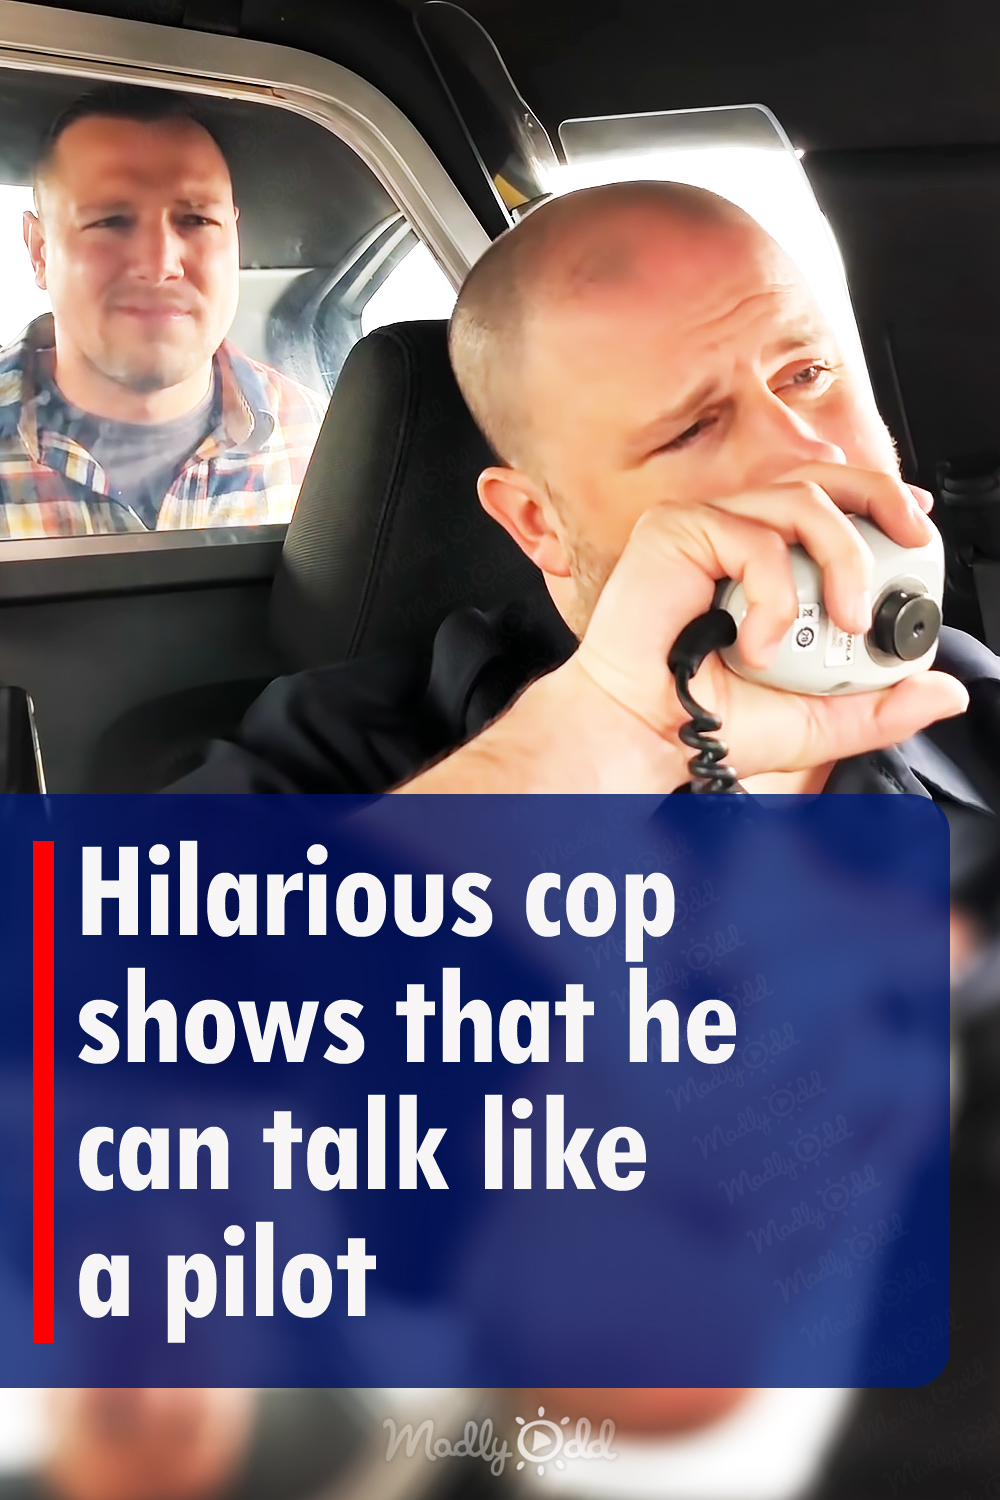 Hilarious cop shows that he can talk like a pilot